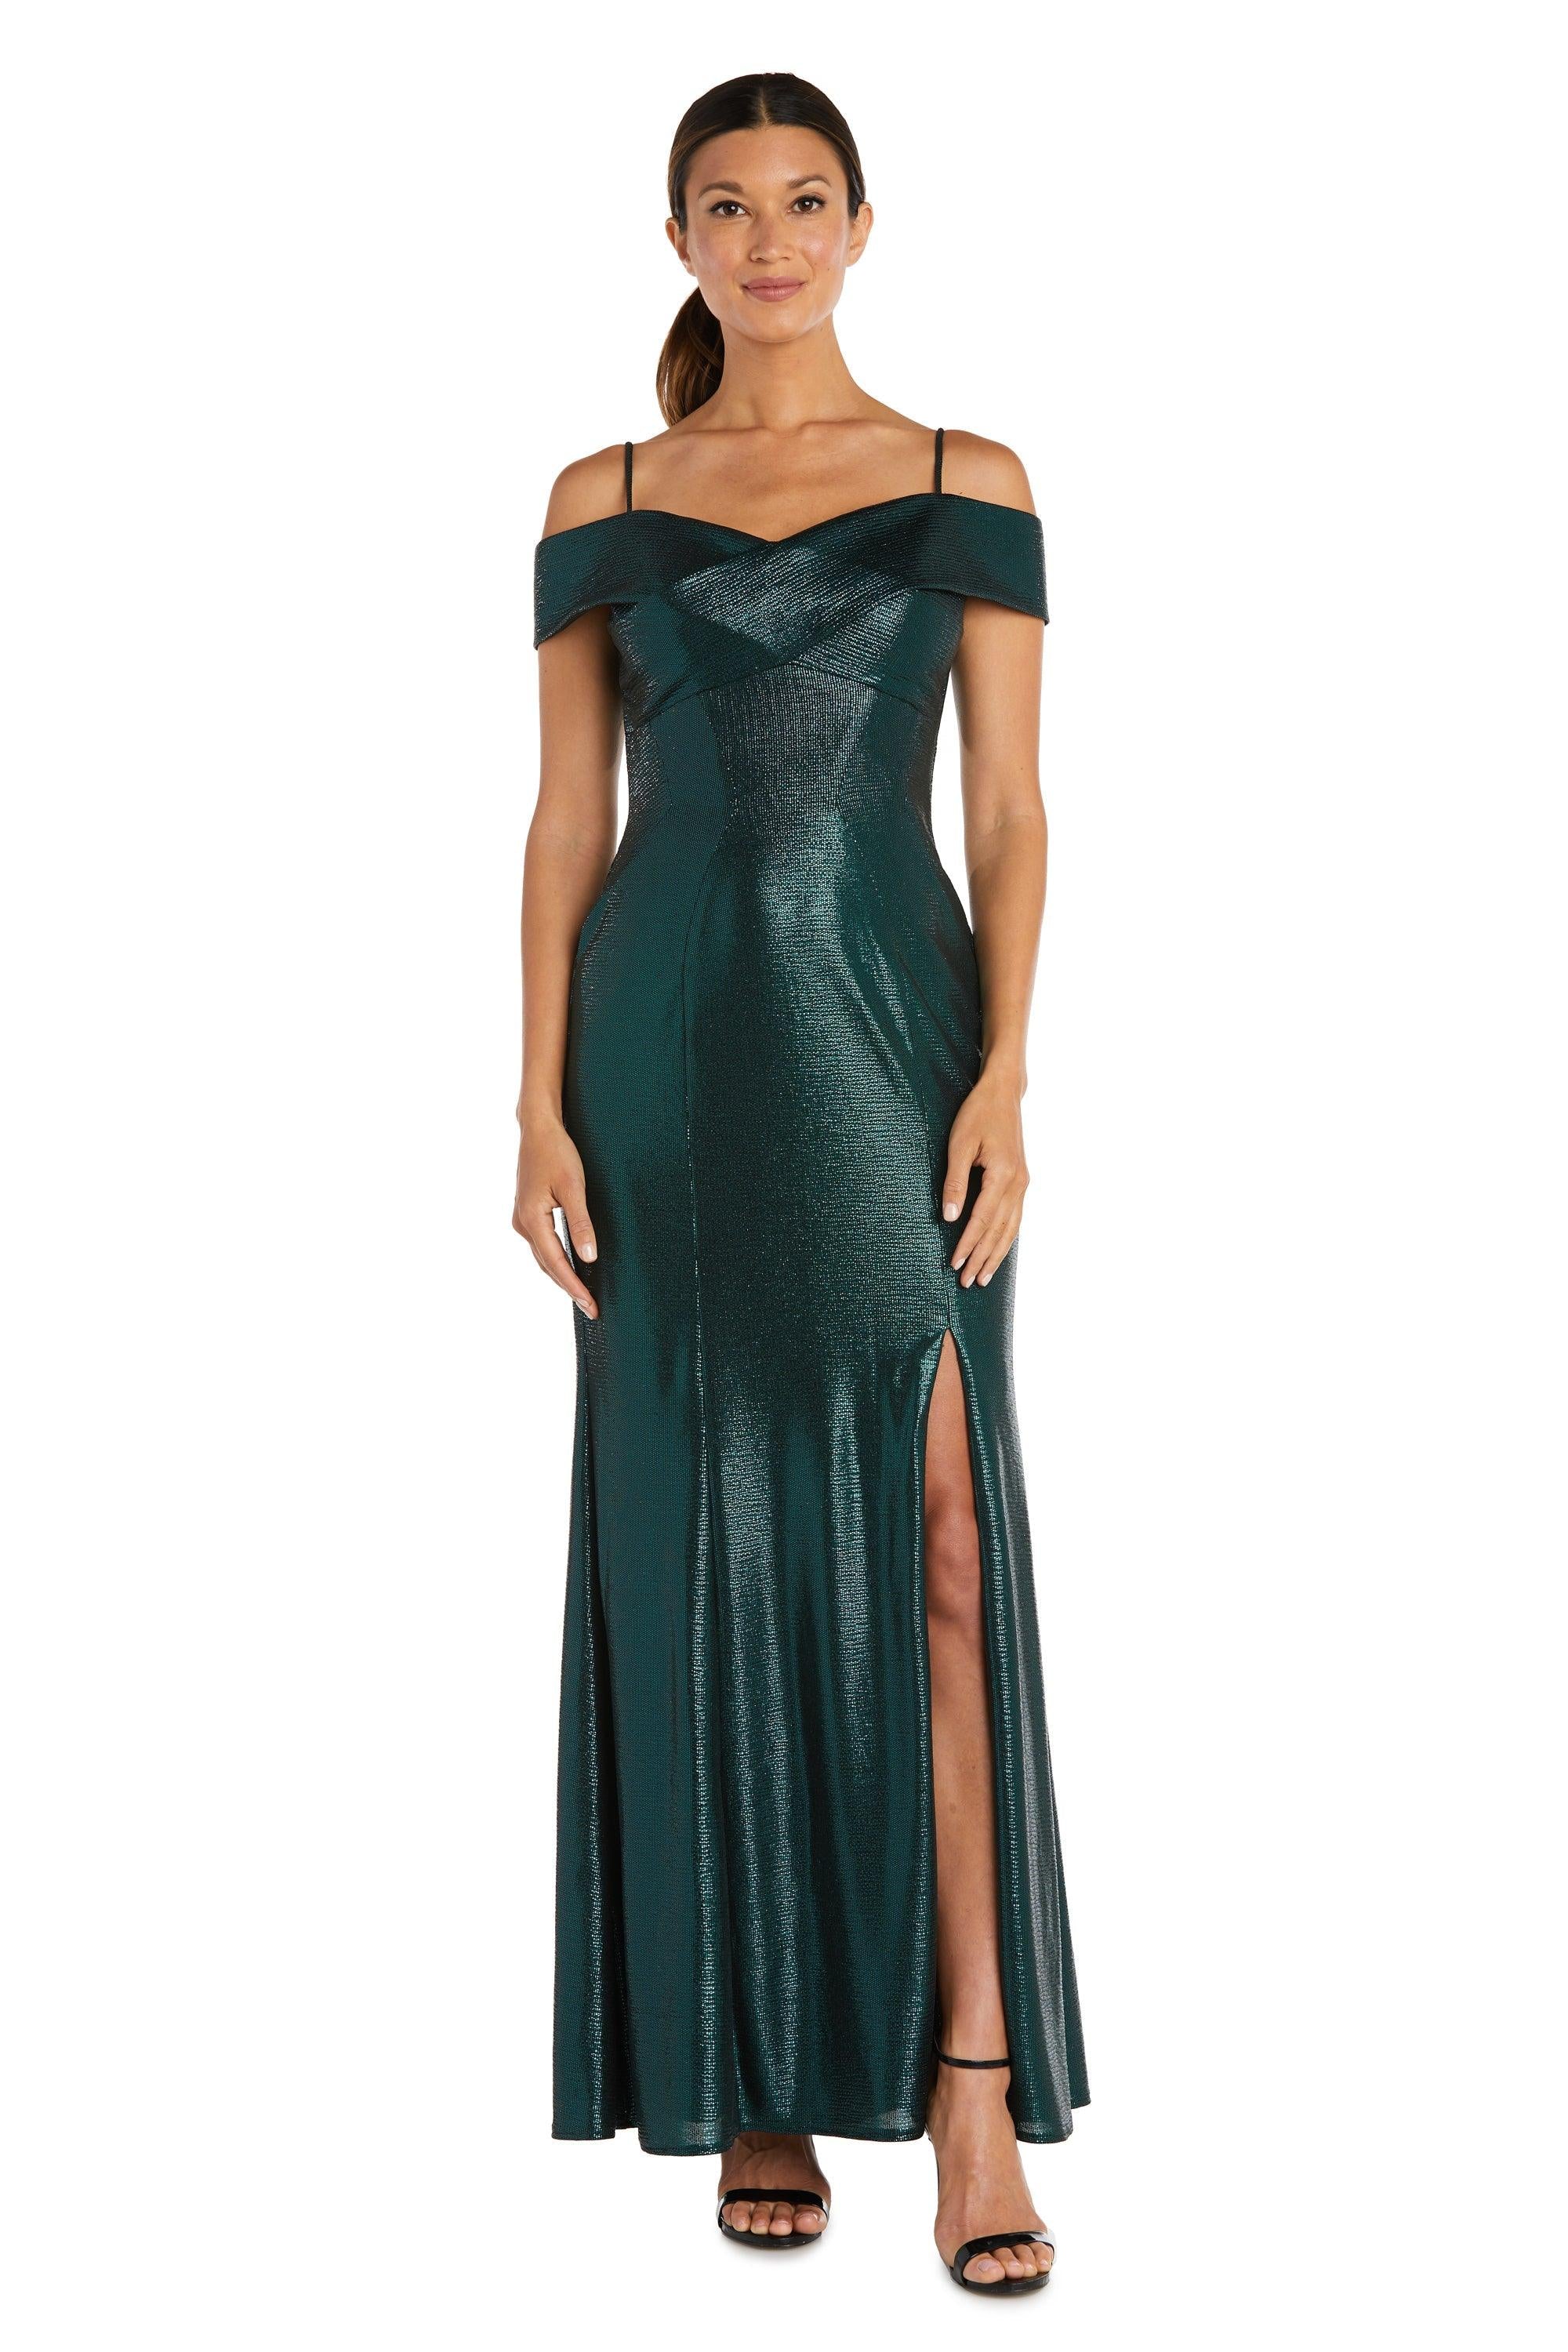 Nightway Long Formal Evening Dress 21761 - The Dress Outlet